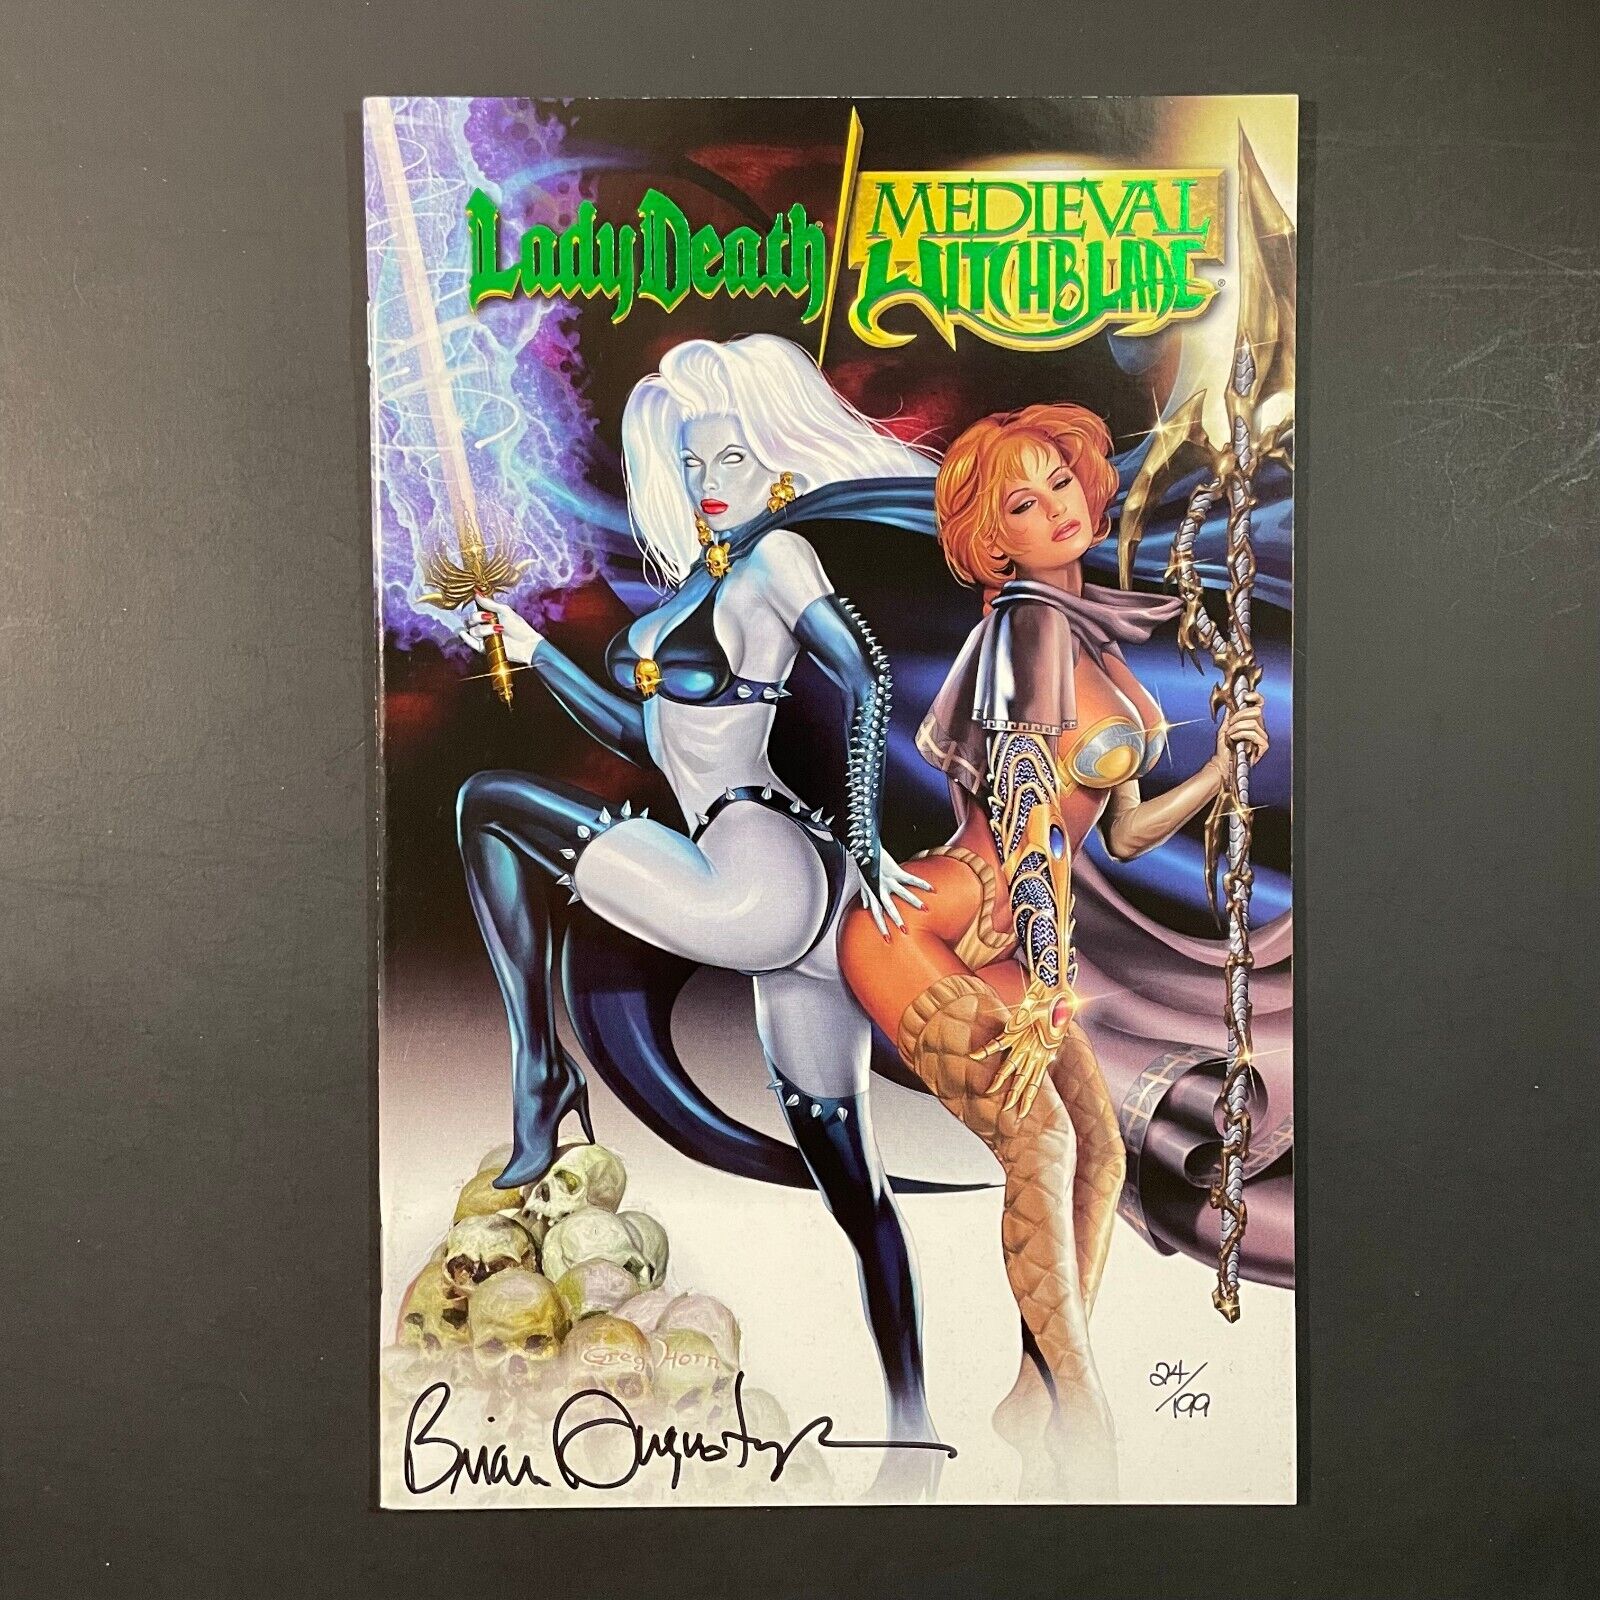 Lady Death Medieval Witchblade 1 SIGNED Brian Augustyn GREEN VARIANT 2001 comic